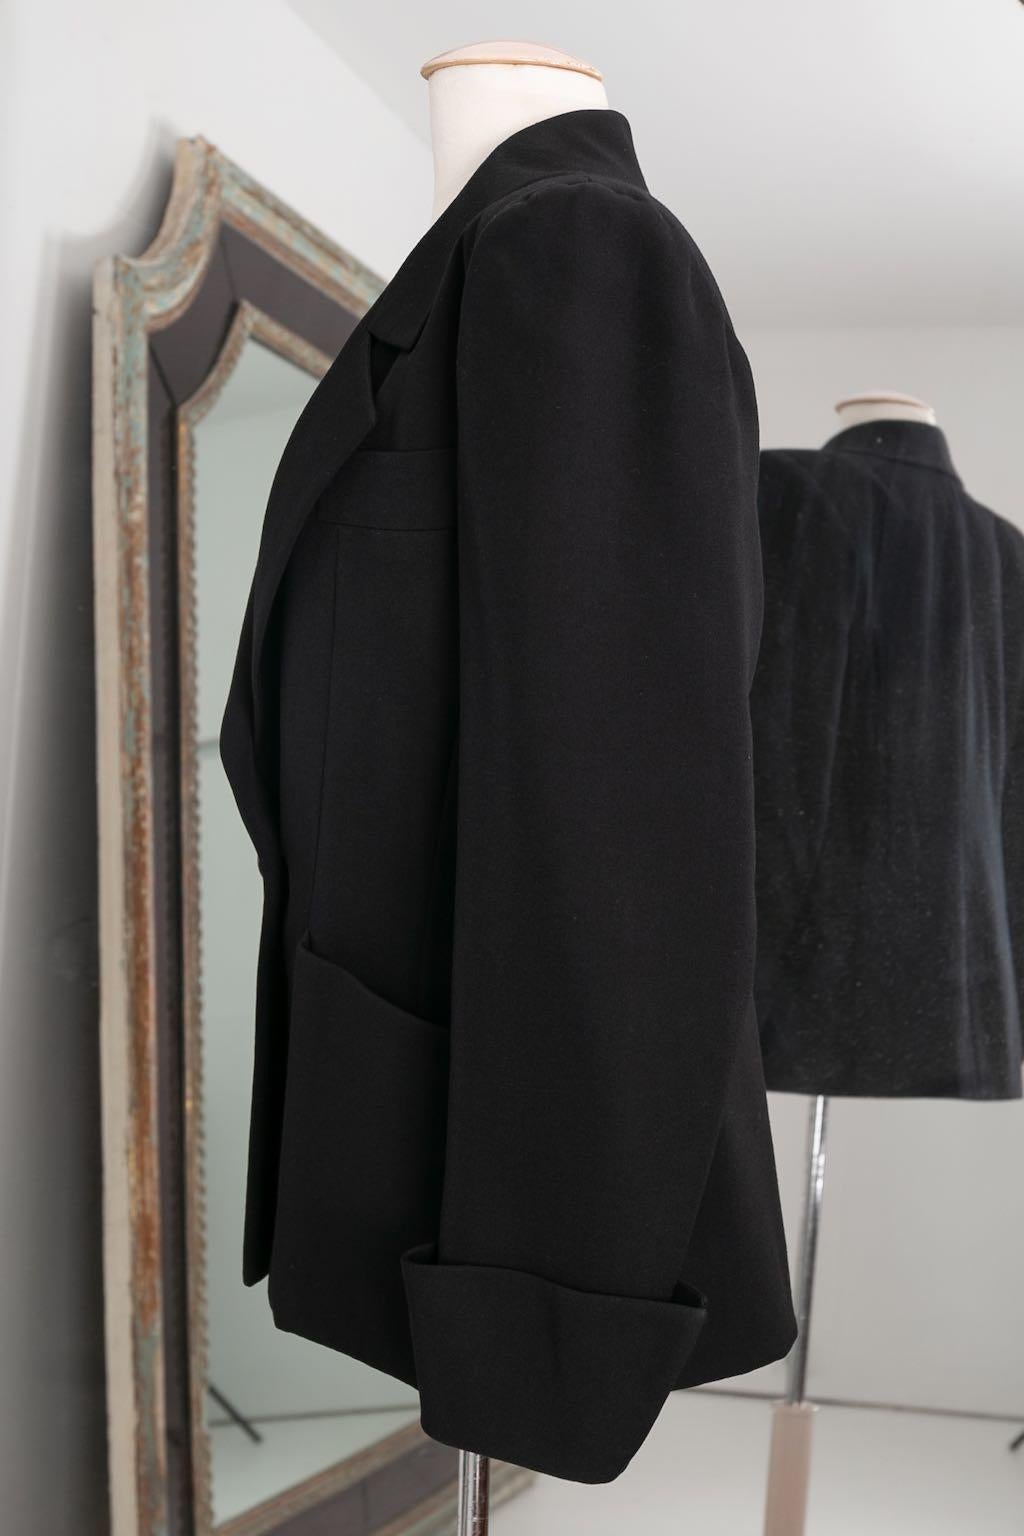 Yves Saint Laurent Haute Couture Black Skirt and Jacket Set, circa 1981/1982 For Sale 10